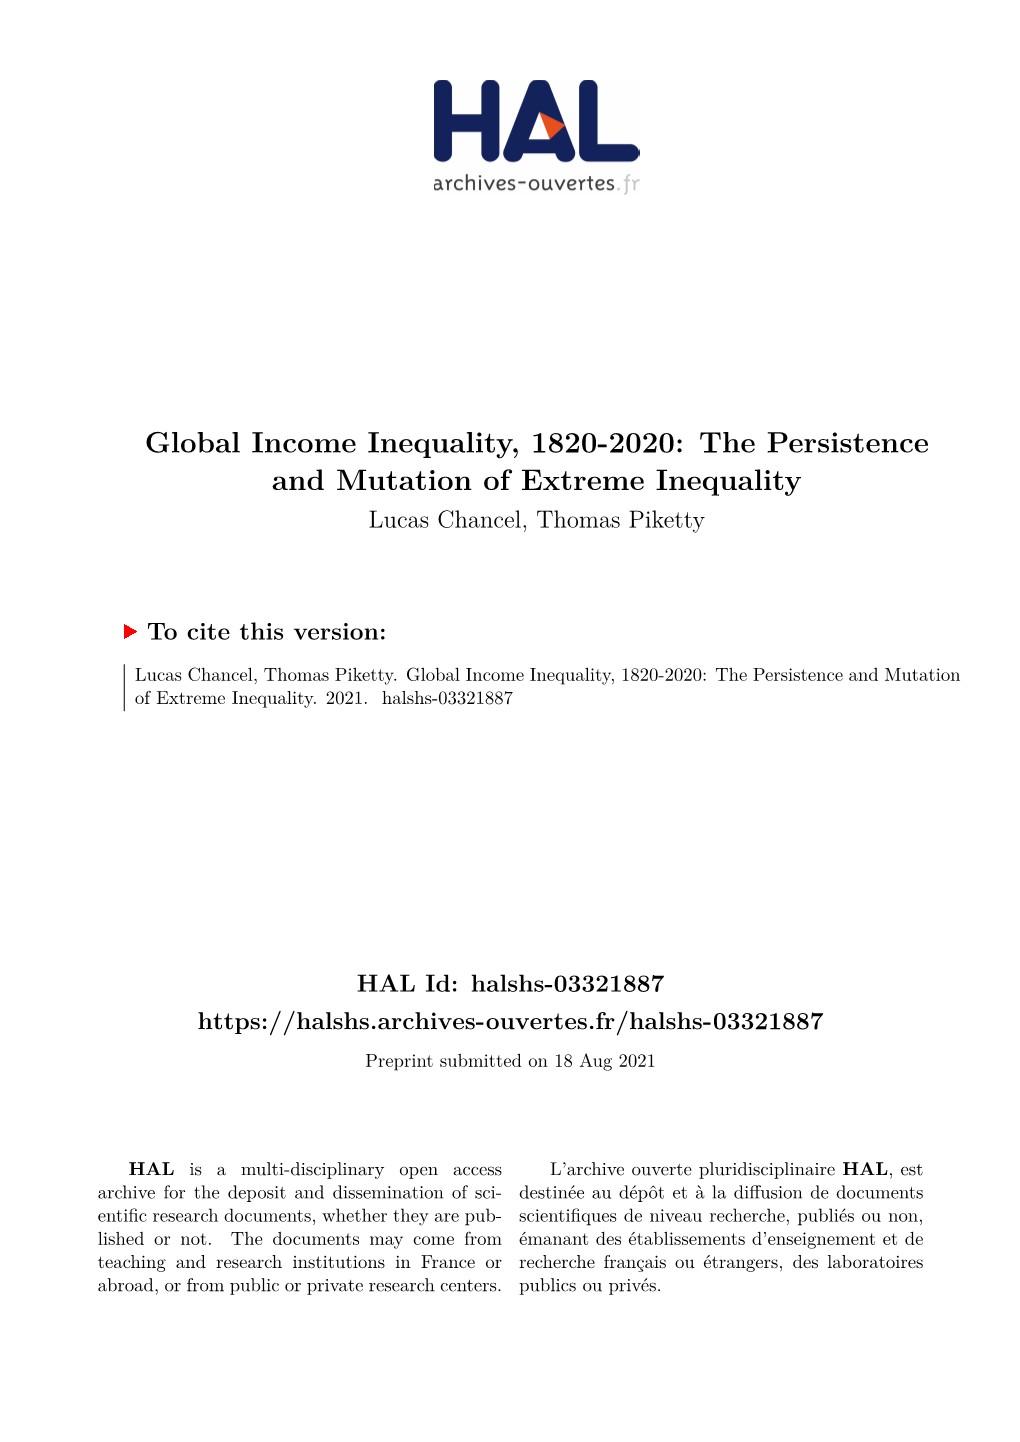 Global Income Inequality, 1820-2020: the Persistence and Mutation of Extreme Inequality Lucas Chancel, Thomas Piketty